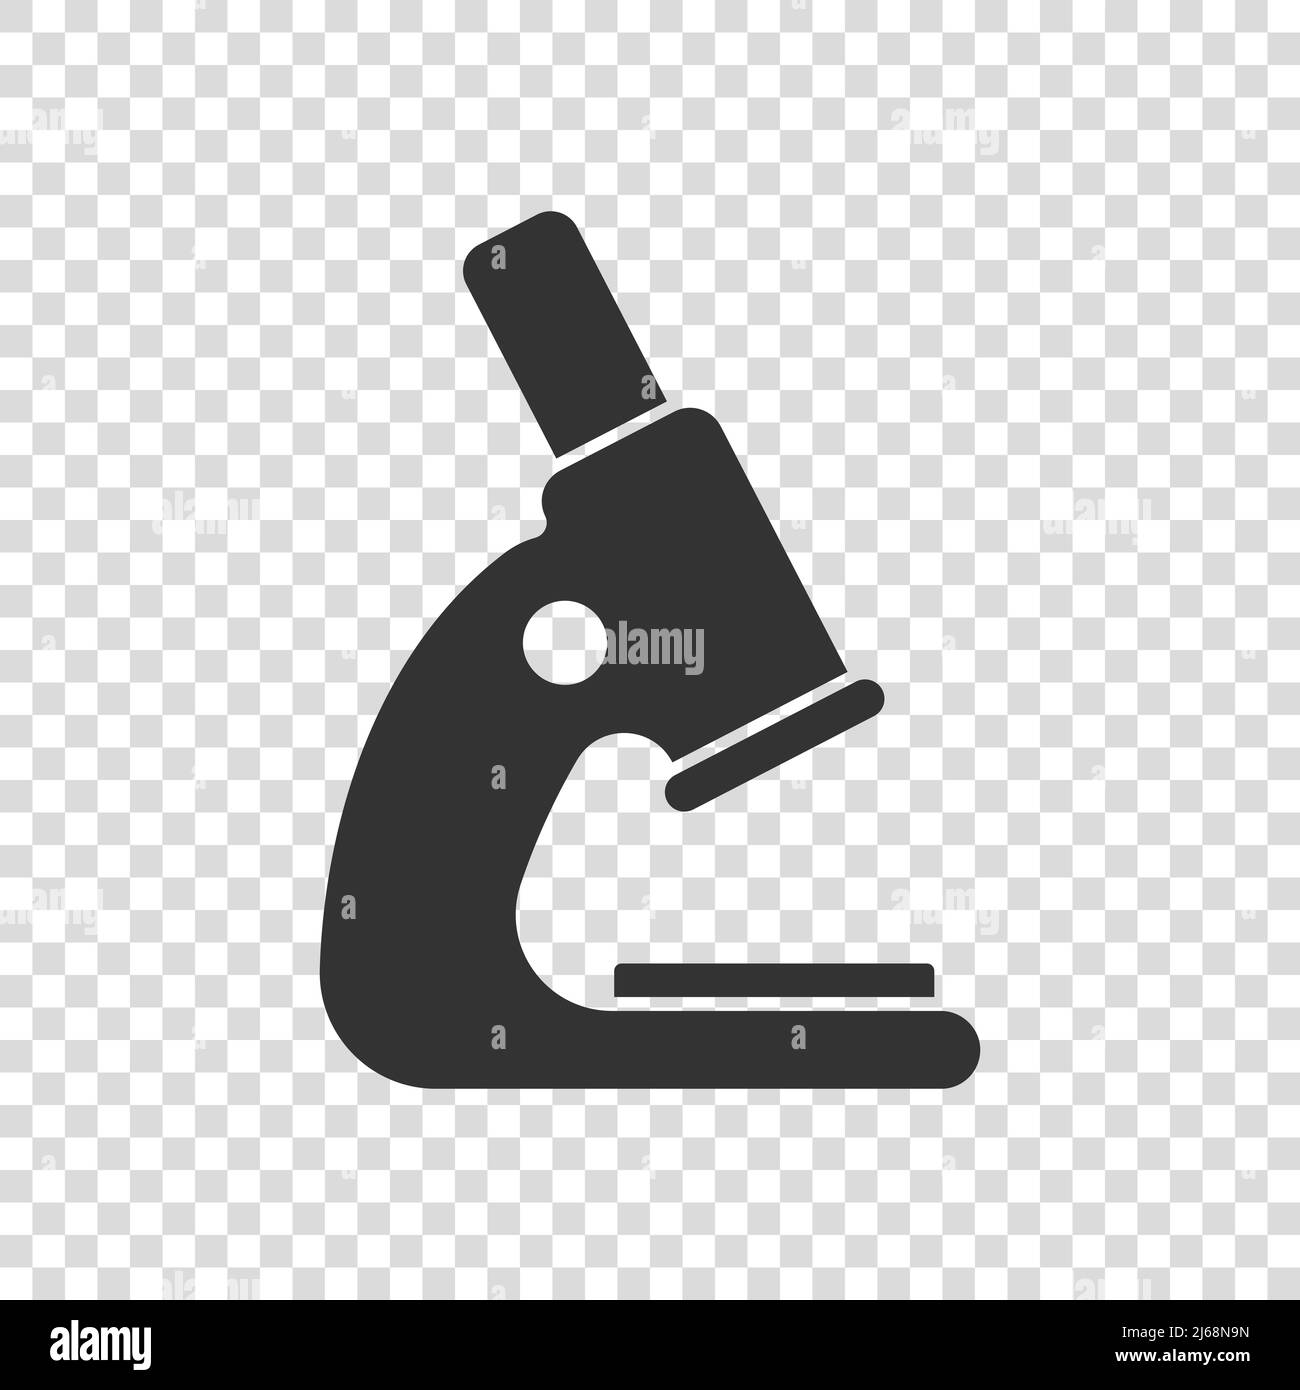 Microscope icon in flat style. Laboratory magnifier vector illustration on isolated background. Biology instrument sign business concept. Stock Vector